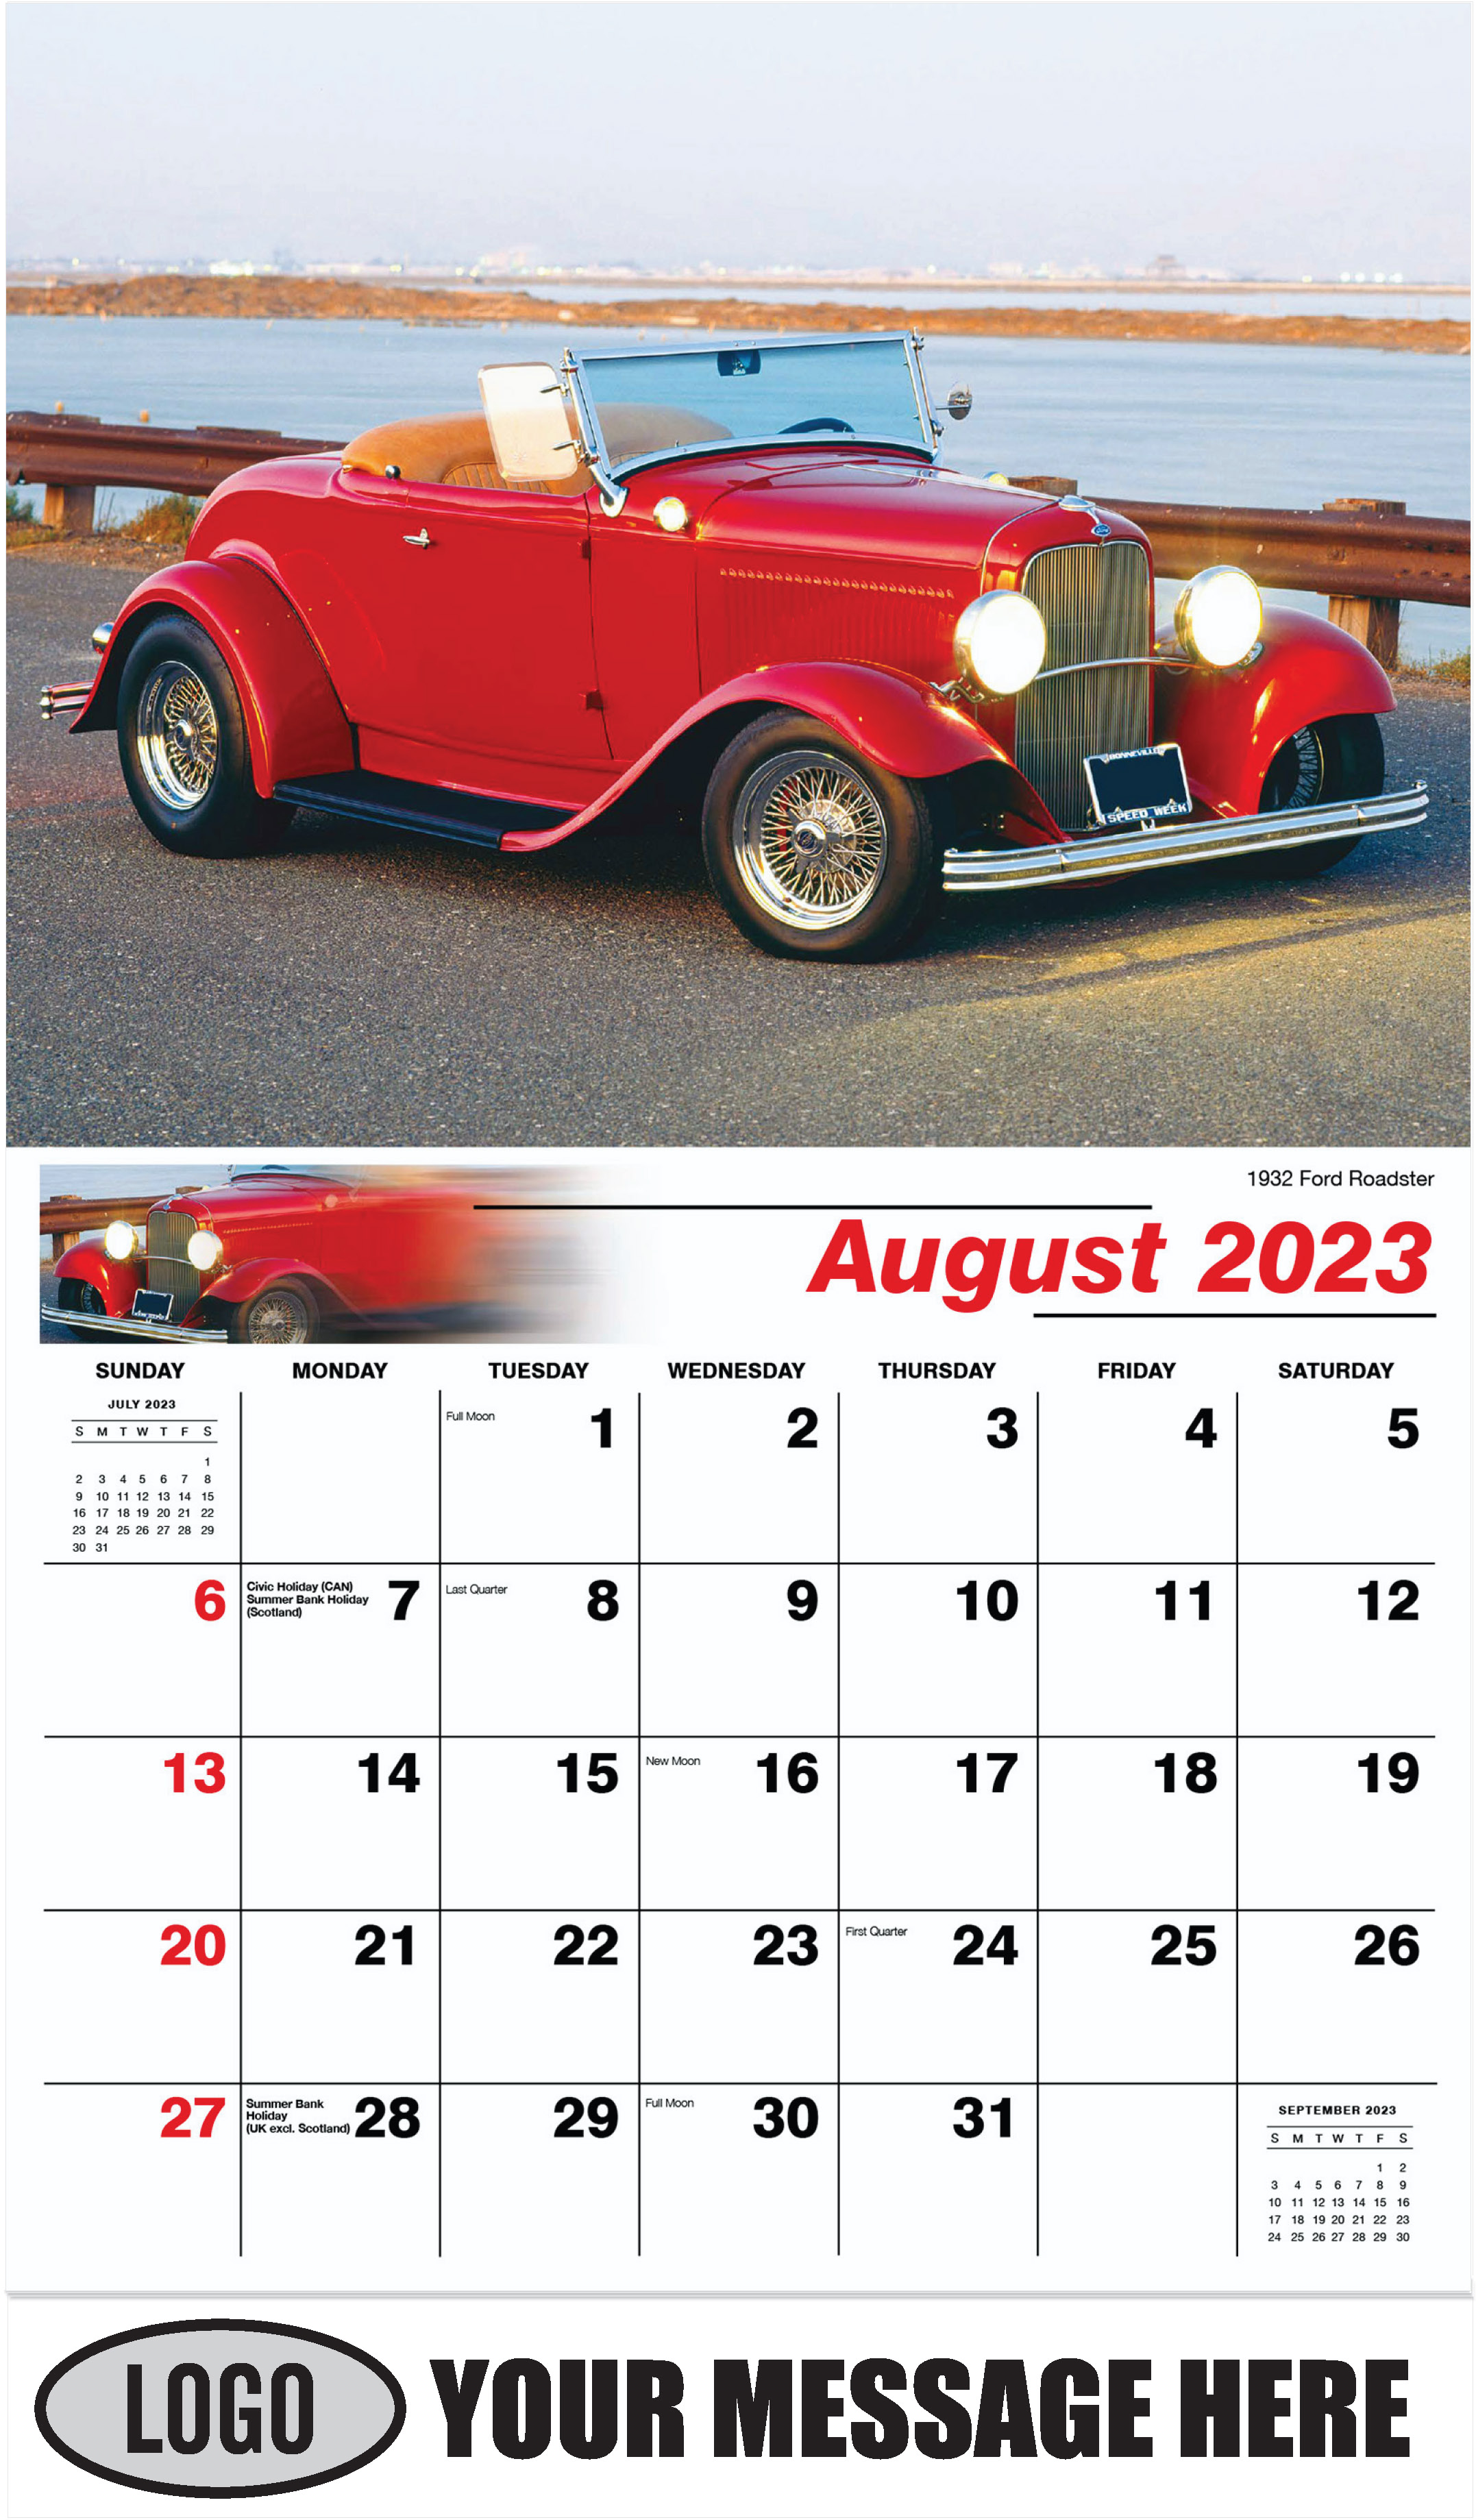 1932 Ford Roadster - August - Classic Cars 2023 Promotional Calendar